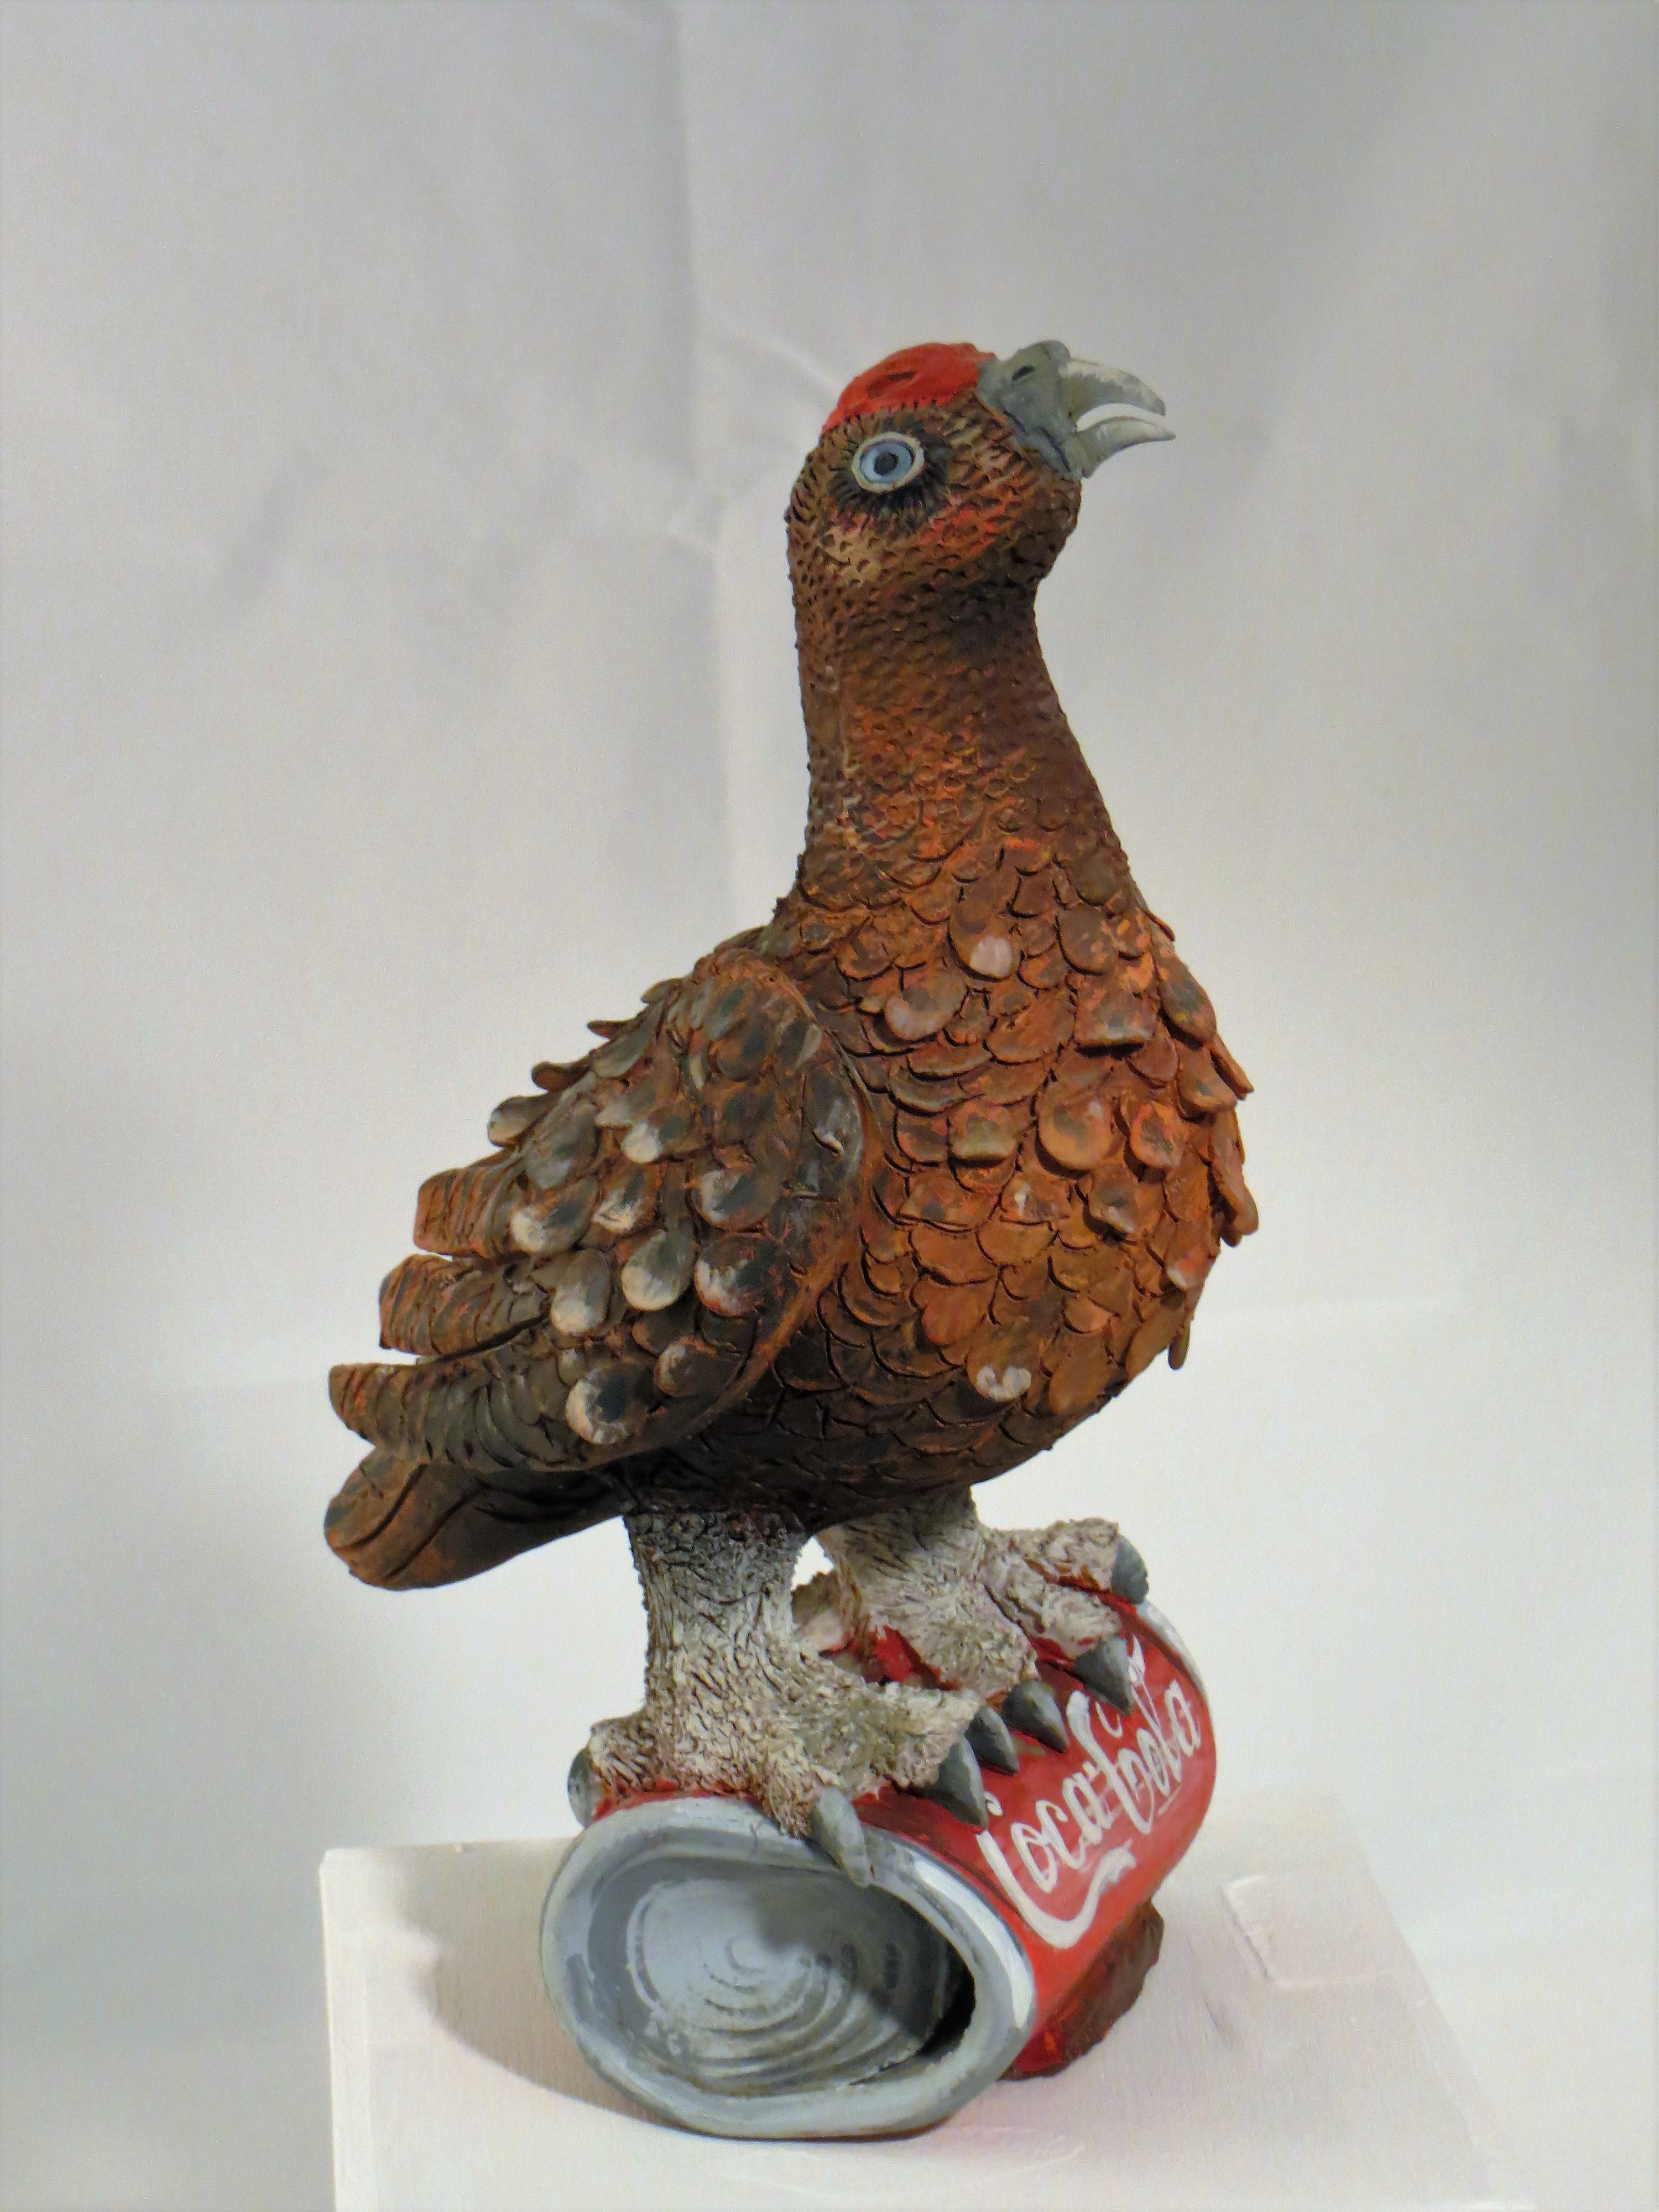 The Grouse (private collection)